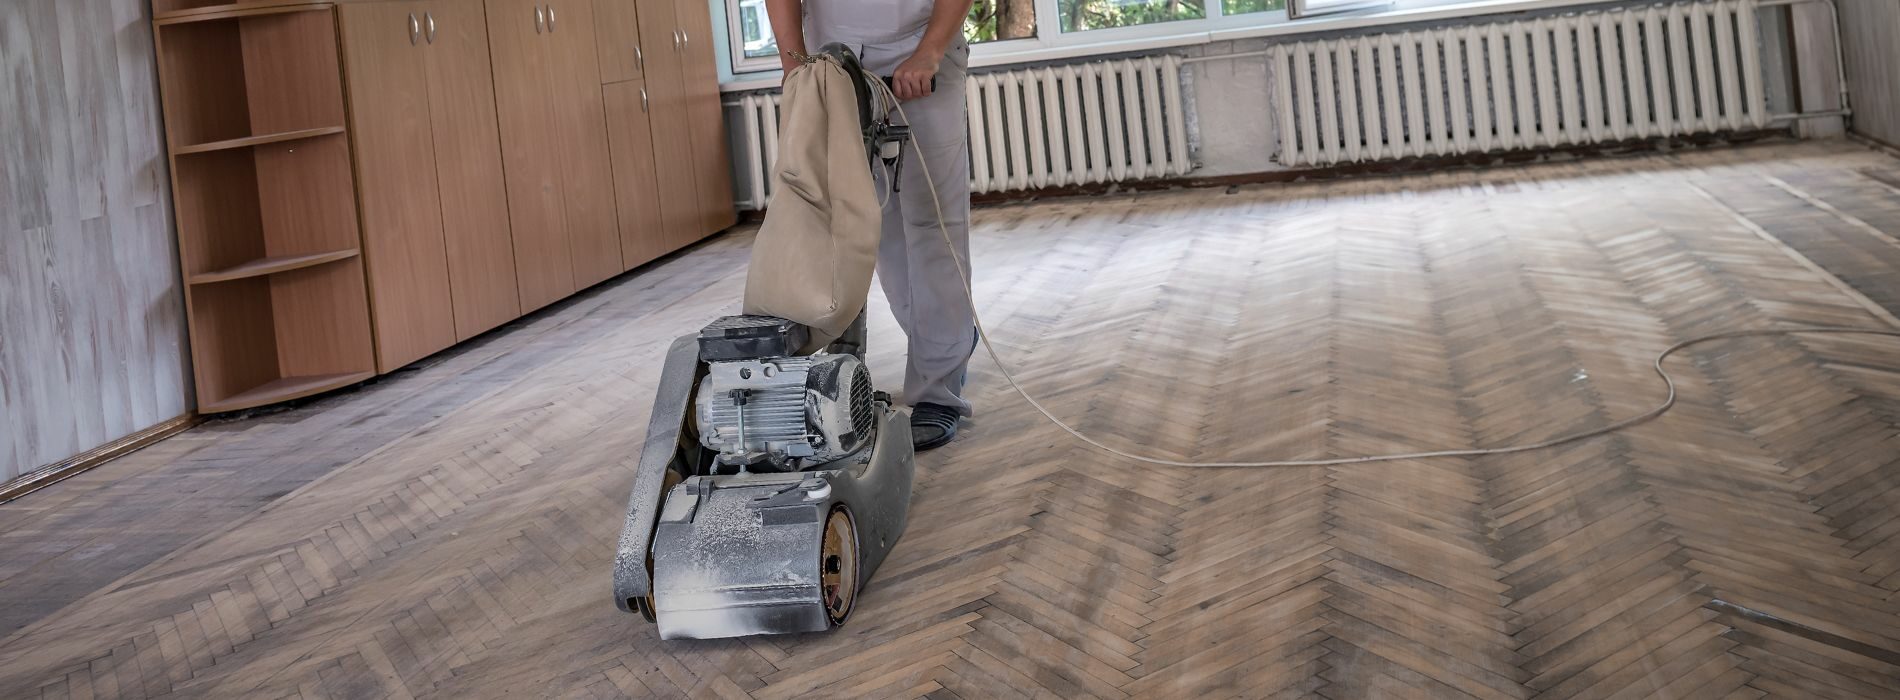 The image showcases the skilled work of Mr Sander® as they undertake the process of sanding hardwood floors. They are utilizing a powerful 250mm x 750mm Bona belt sander, specifically designed for this task. The belt sander is connected to a dust extraction system equipped with a HEPA filter, ensuring a clean and efficient result.